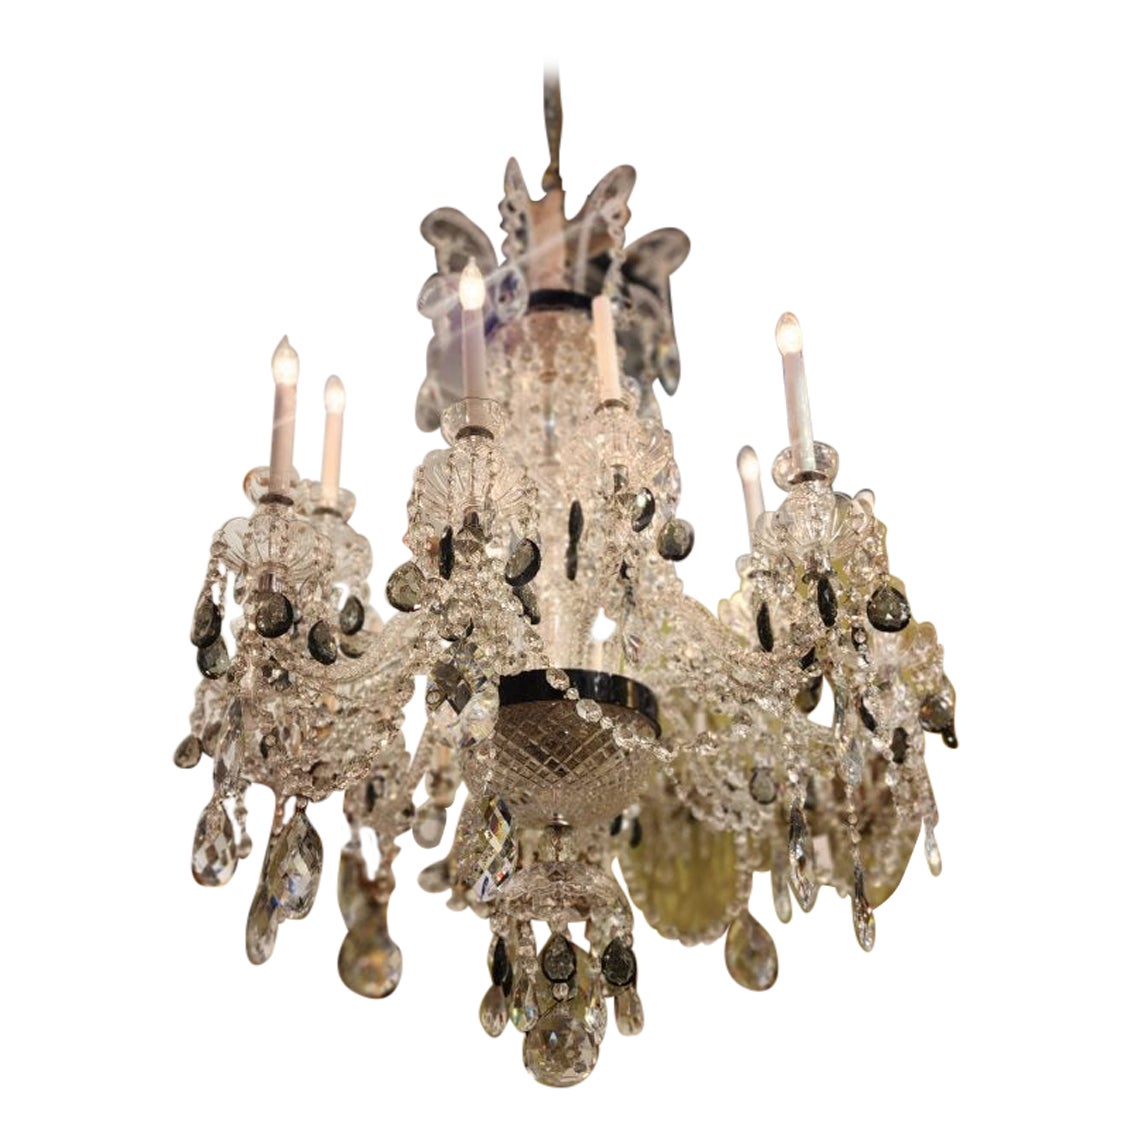 Beautiful English Waterford  Chandelier 